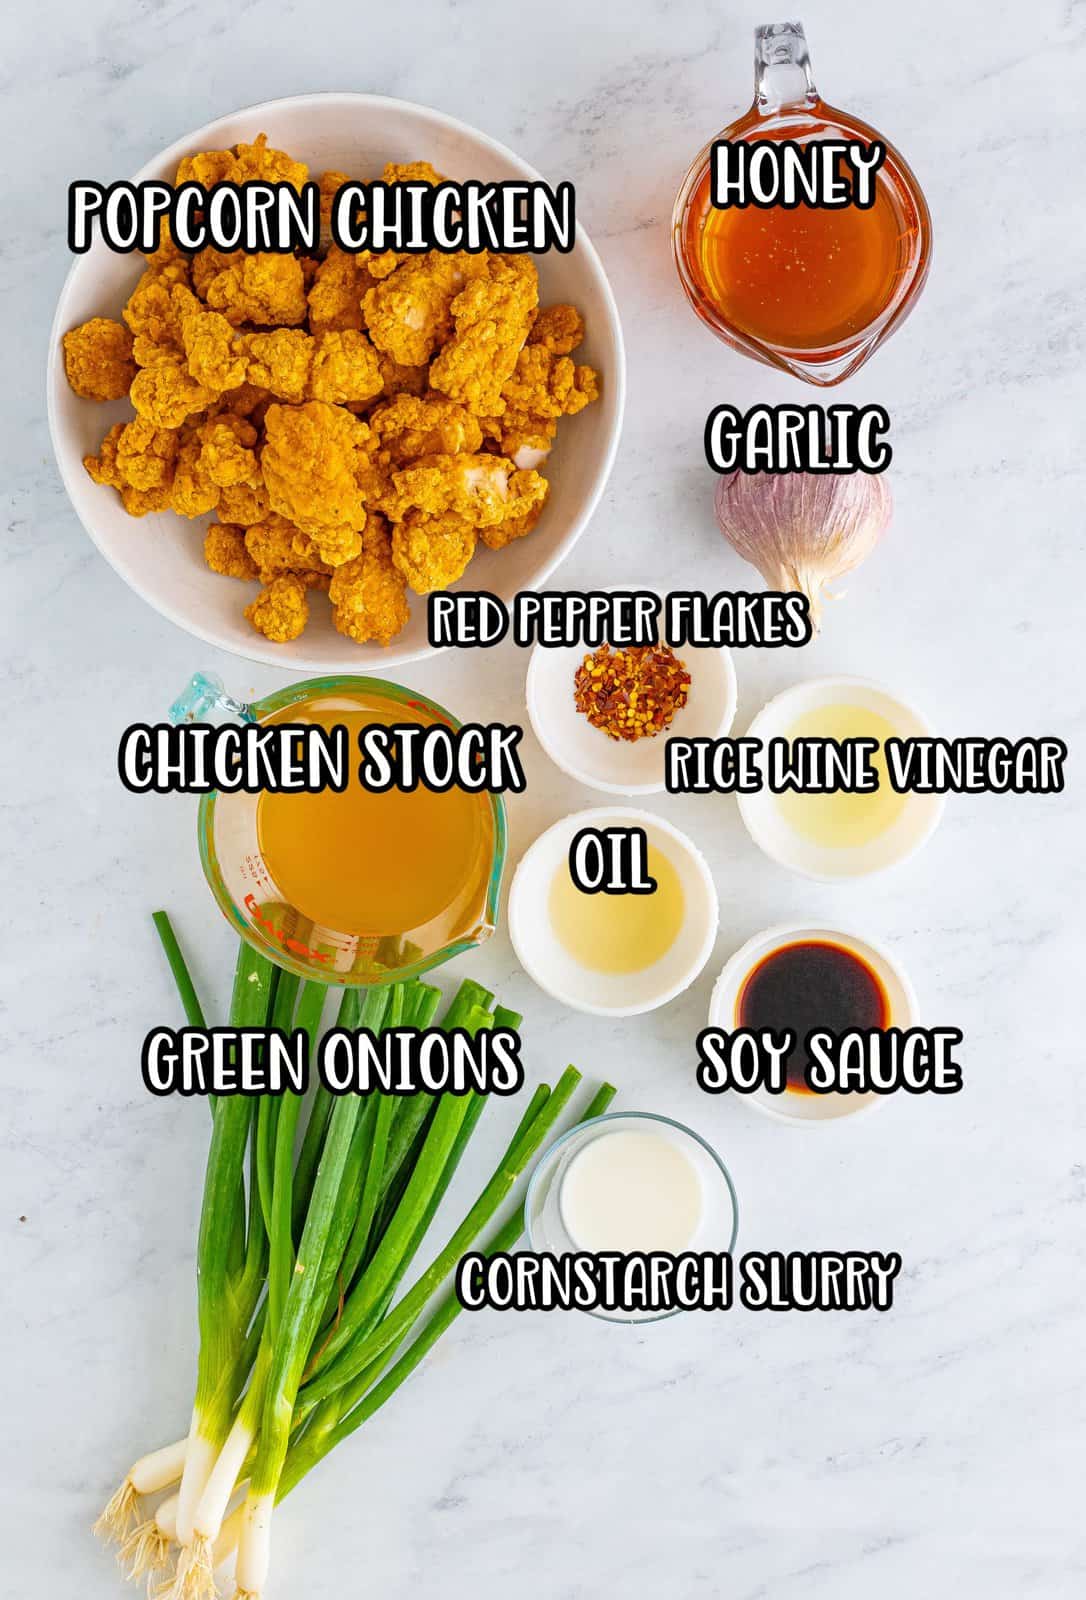 Popcorn chicken, vegetable oil, green onions, garlic cloves, red pepper flakes, chicken stock, honey, soy sauce, rice wine vinegar, corn starch and water.